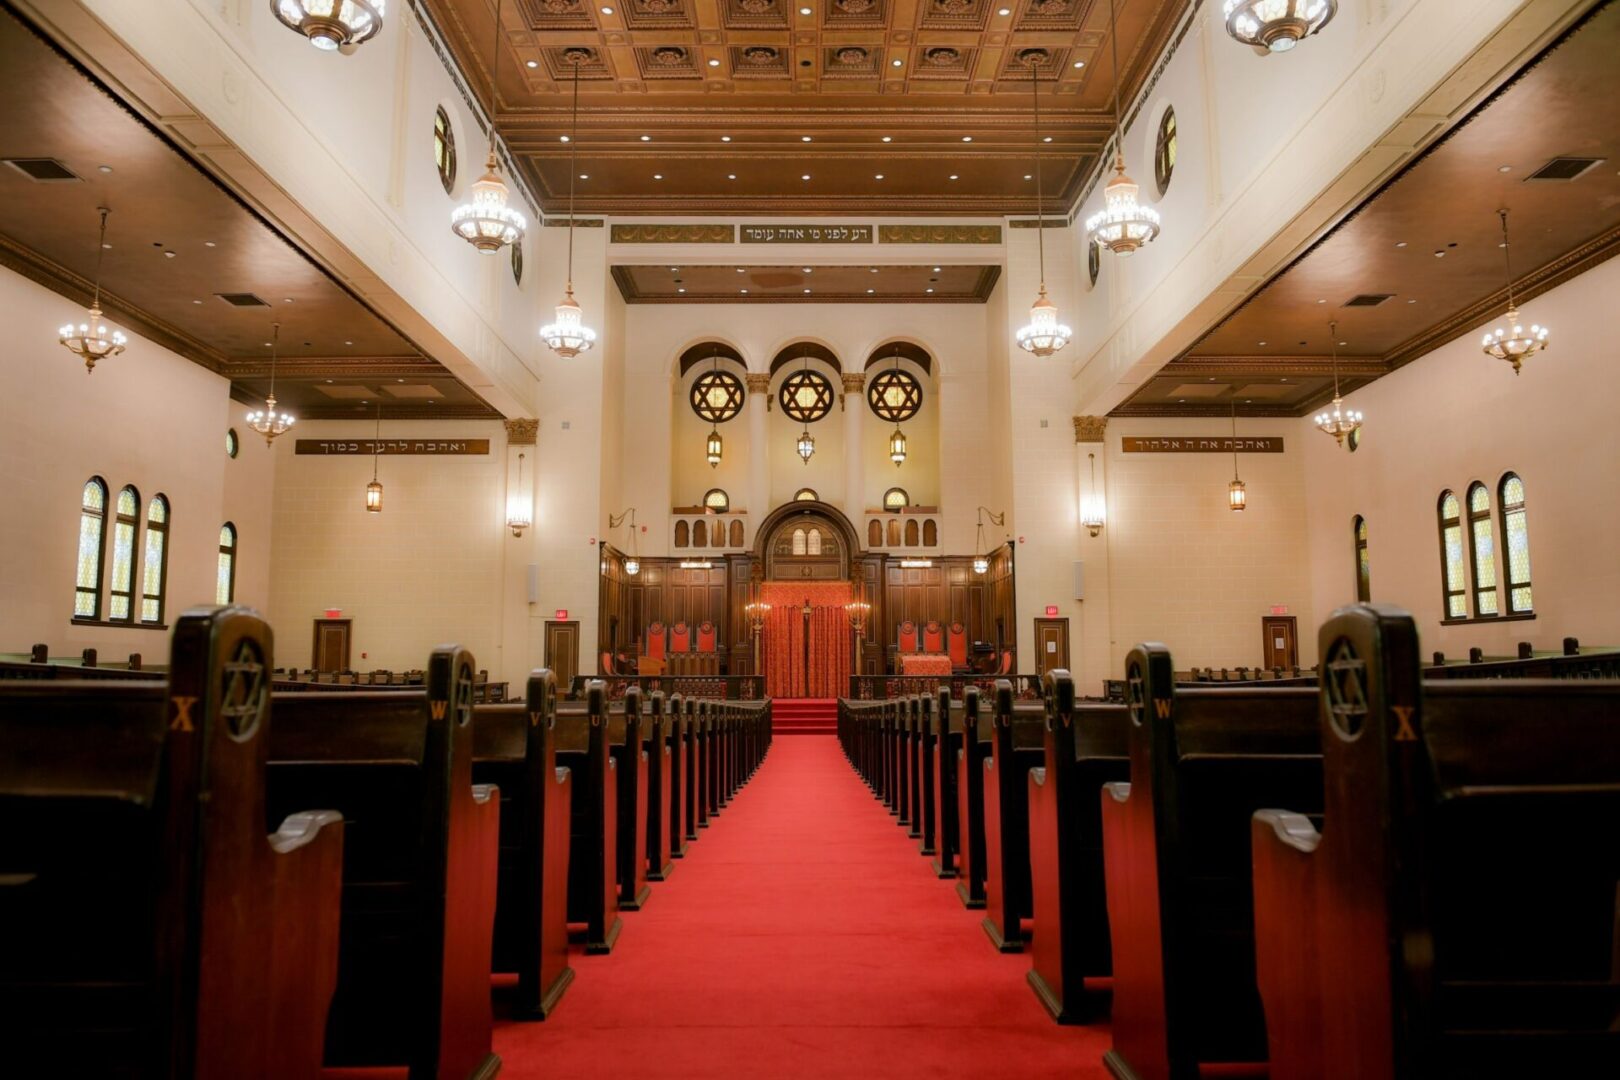 A church with red carpet and pews in it